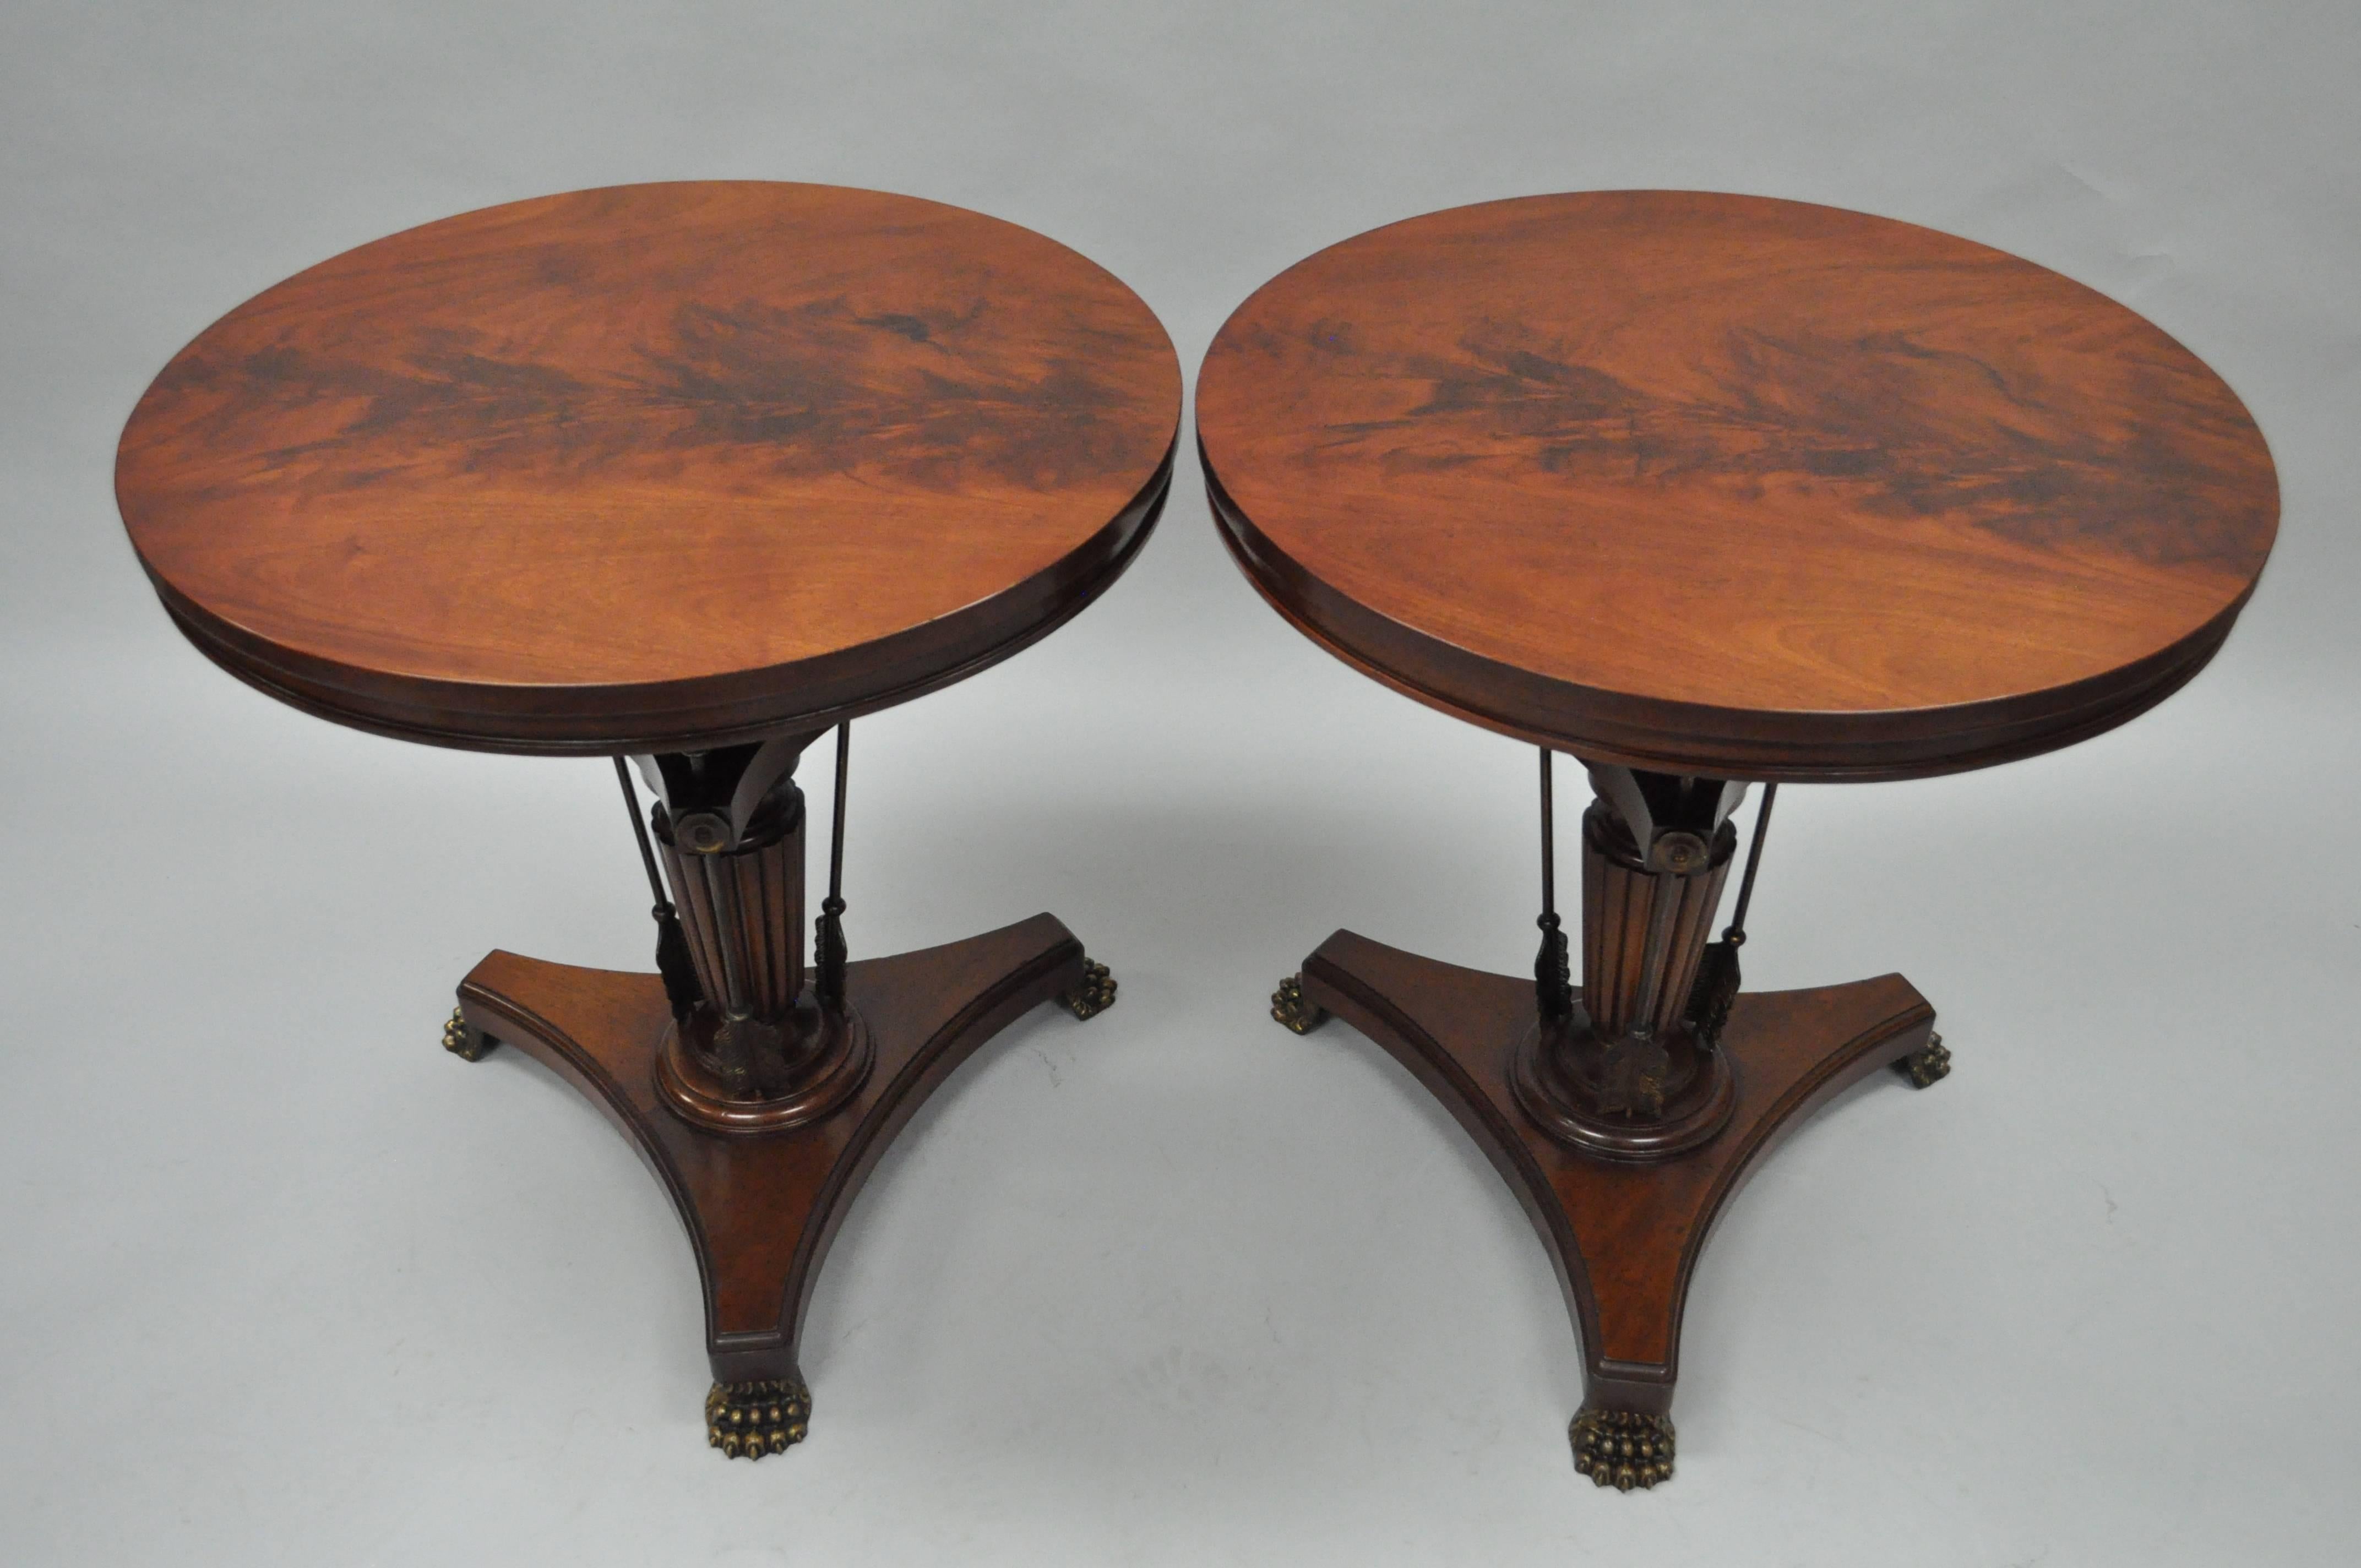 Quality pair of crotch mahogany and brass Neoclassical style arrow base round side or accent tables. Item features figured crotch mahogany tops over solid mahogany reed carved pedestal bases with triple brass arrows and cast brass paw feet. Great